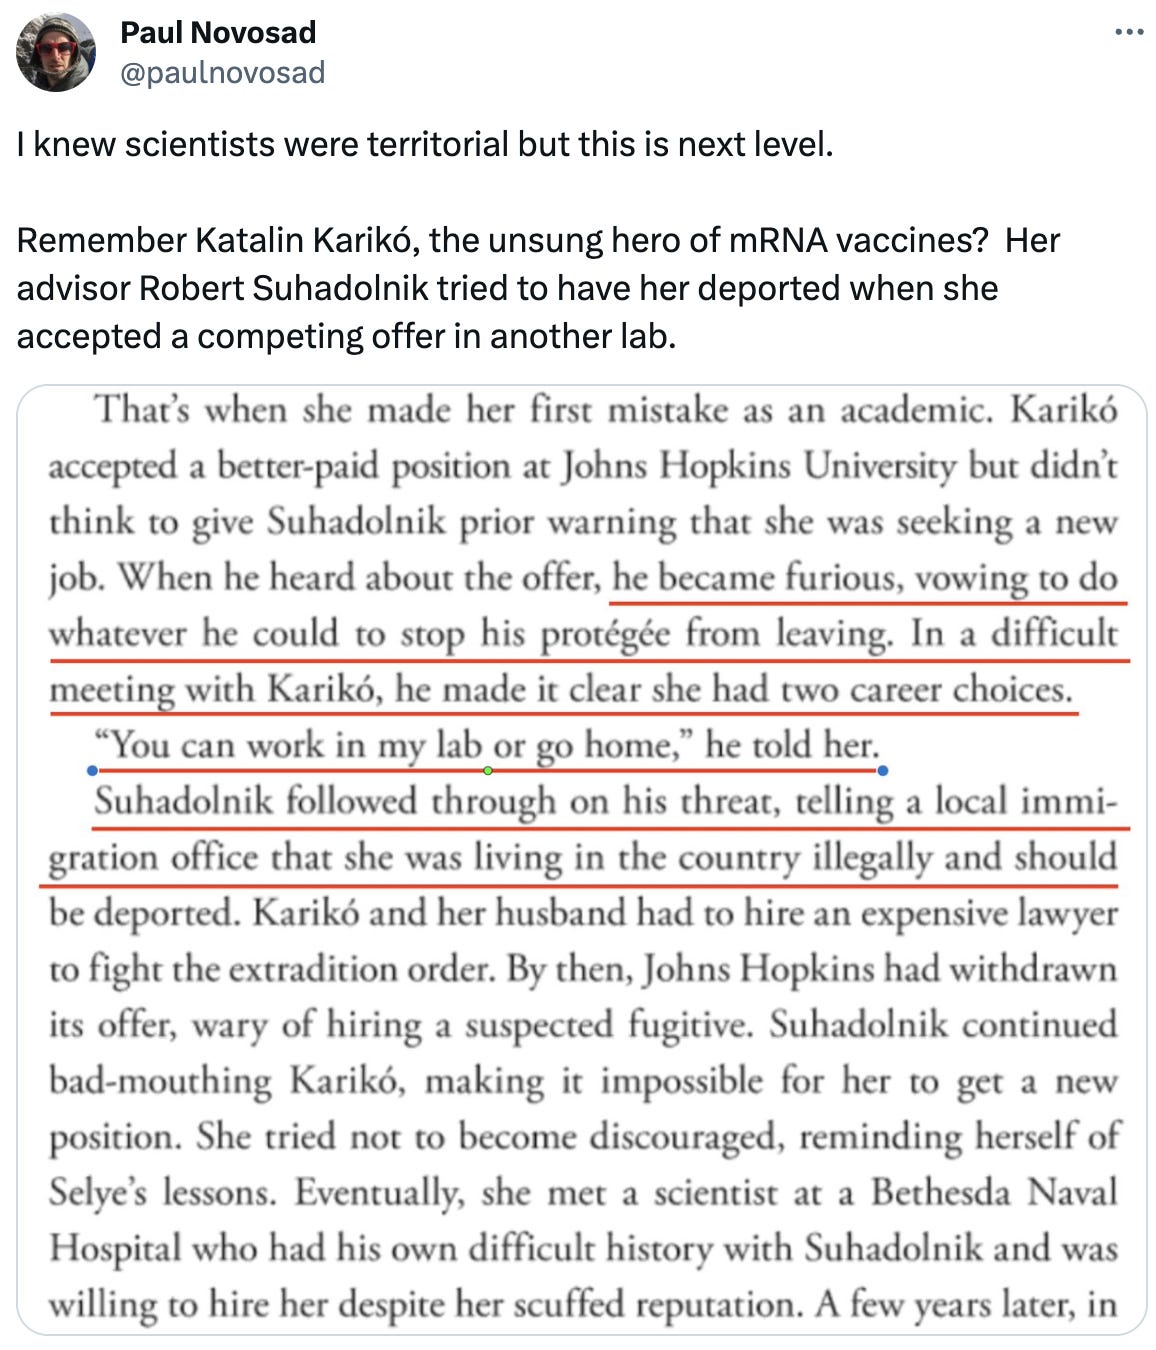  See new posts Conversation Paul Novosad @paulnovosad I knew scientists were territorial but this is next level.  Remember Katalin Karikó, the unsung hero of mRNA vaccines?  Her advisor Robert Suhadolnik tried to have her deported when she accepted a competing offer in another lab.